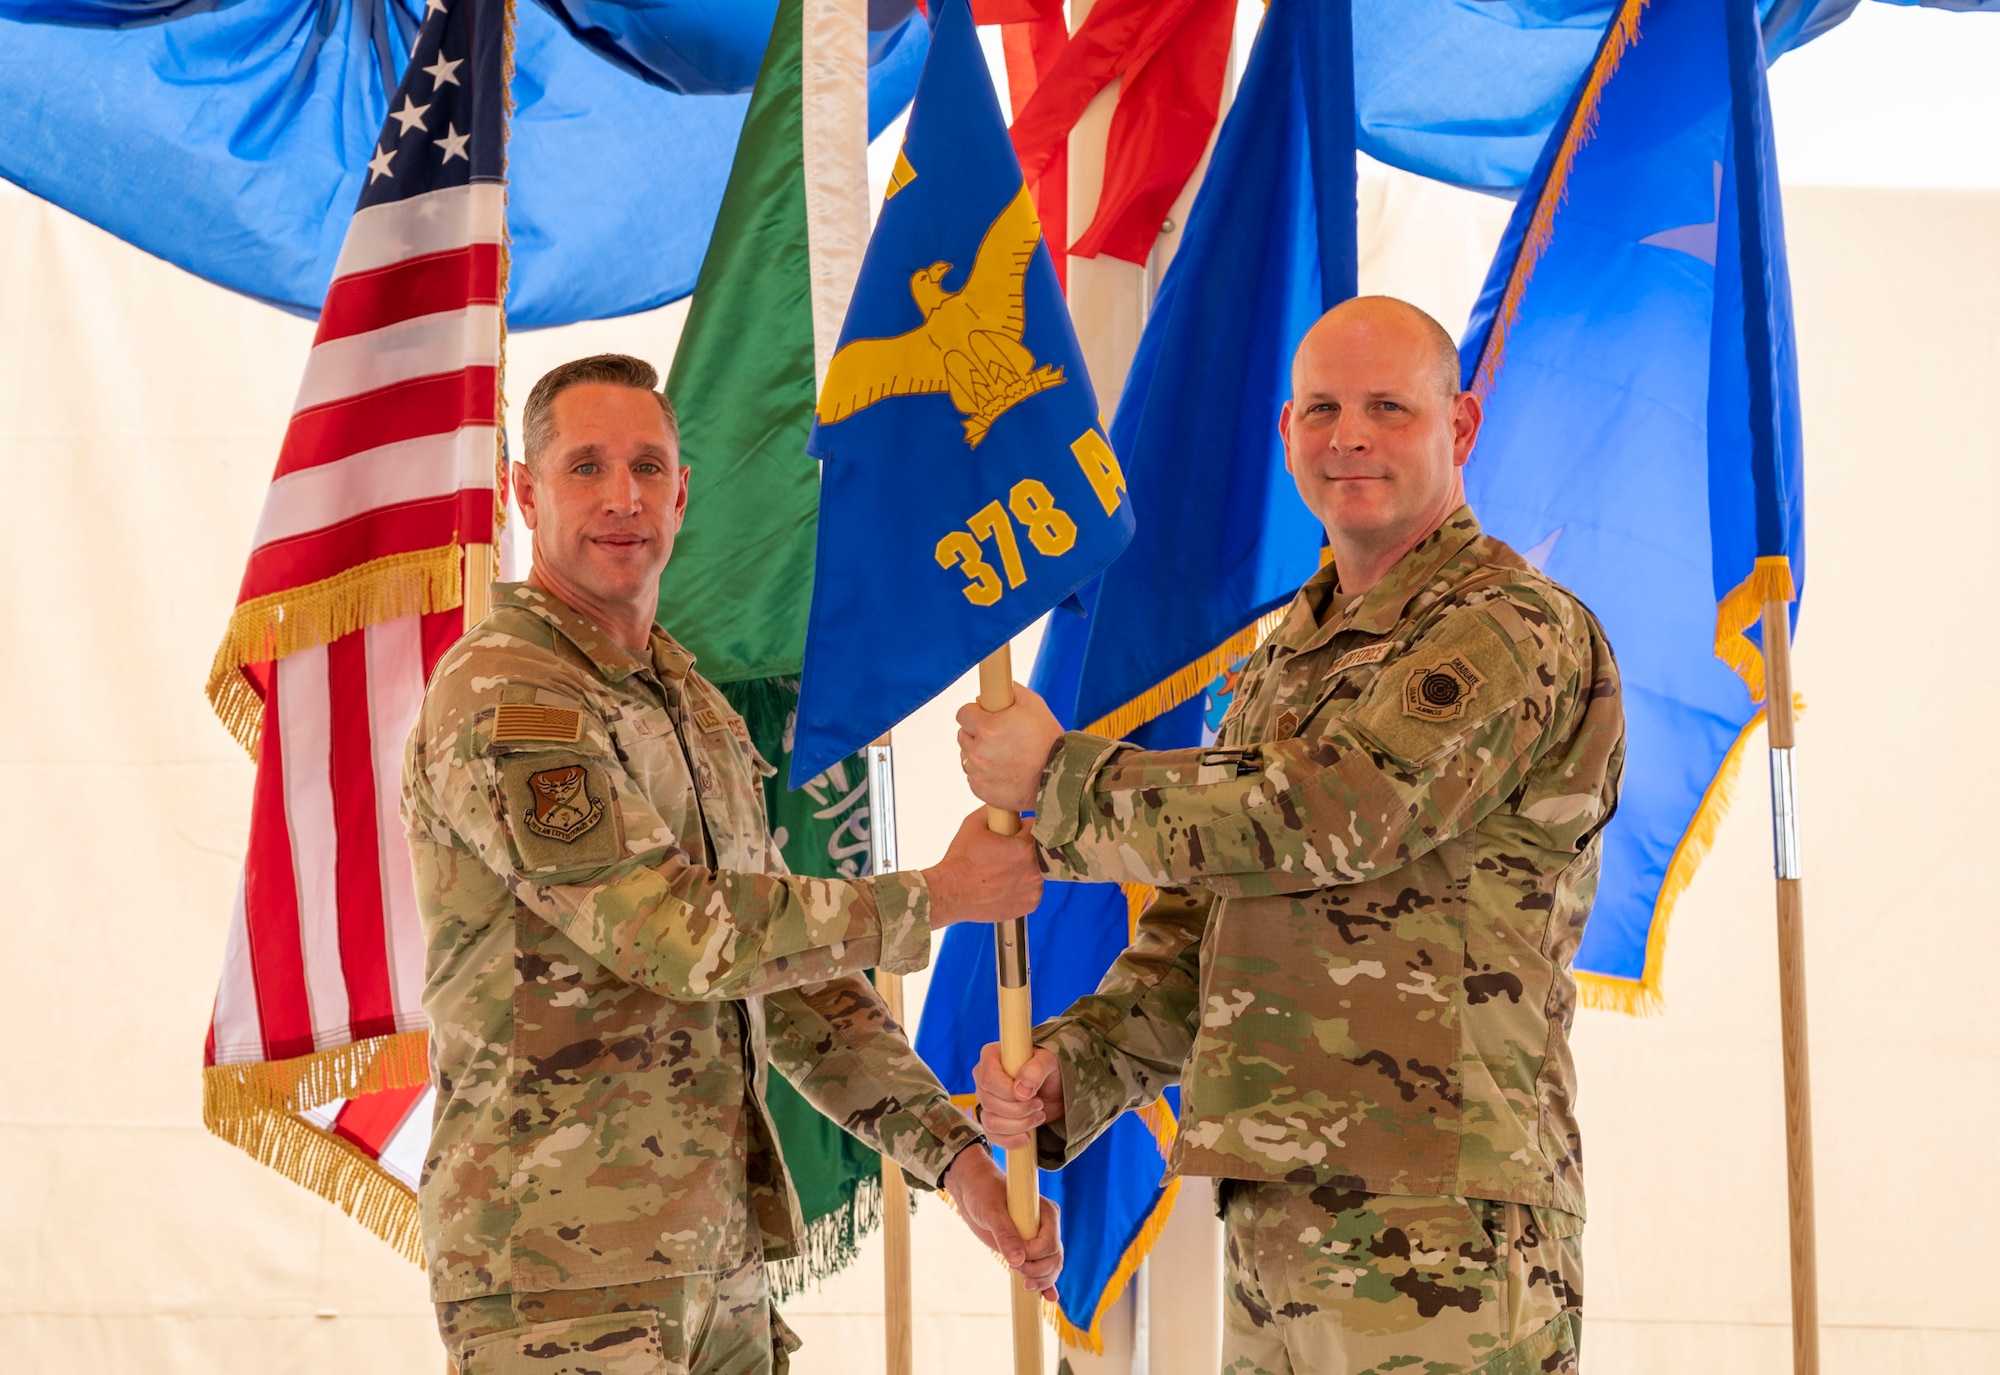 U.S. Air Force Chief Master Sgt. William Kelly, left, outgoing 378th Air Expeditionary Wing command chief, passes the guidon to Chief Master Sgt. Randolph Crosslin, incoming 378th AEW command chief, during a change of command ceremony at Prince Sultan Air Base, Kingdom of Saudi Arabia, May 18, 2023. During the ceremony, Brig. Gen. William Betts relinquished command of the 378th AEW to Brig. Gen. Akshai Gandhi. The tradition of change of command ceremonies are to allow service members to witness their new leader assume the responsibility and trust associated with the position of commander. (U.S. Air Force photo by Senior Airman Stephani Barge)